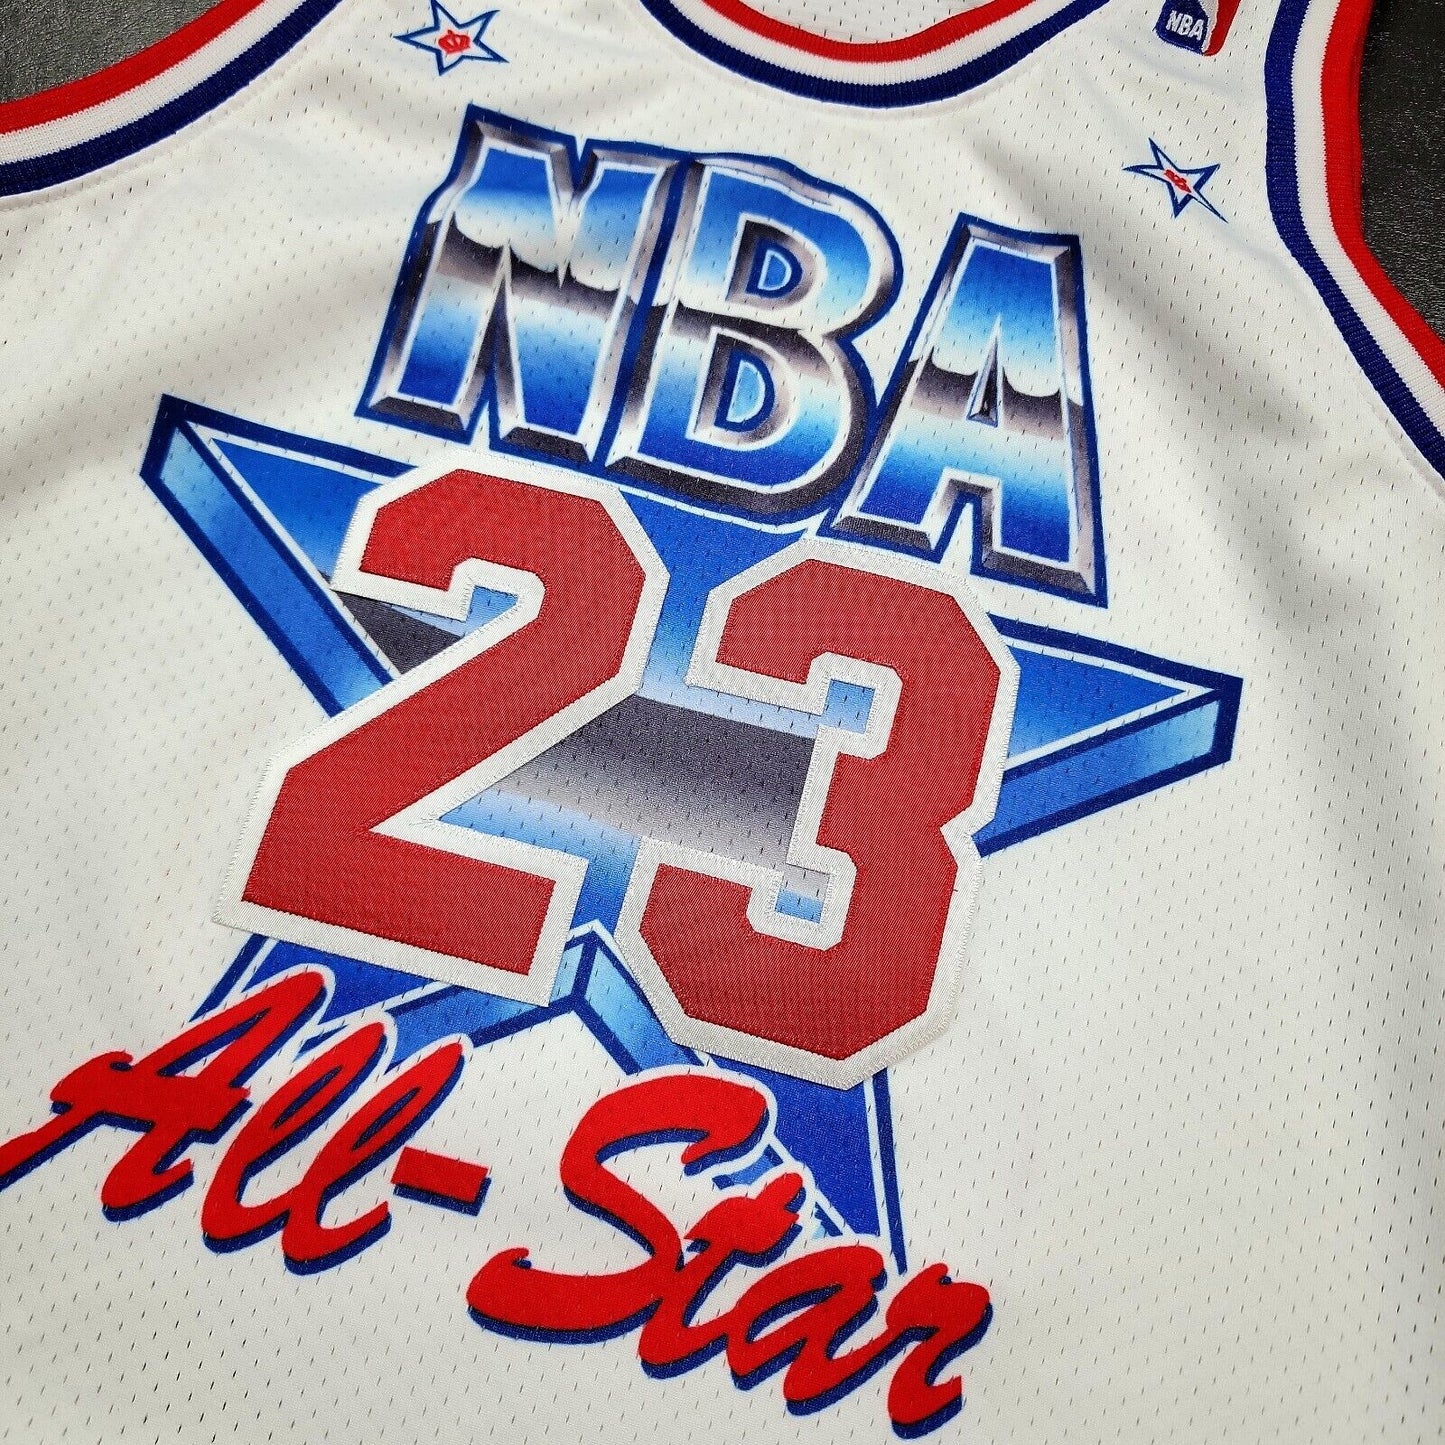 100% Authentic Michael Jordan Mitchell & Ness 1991 All Star Game Jersey Size 44